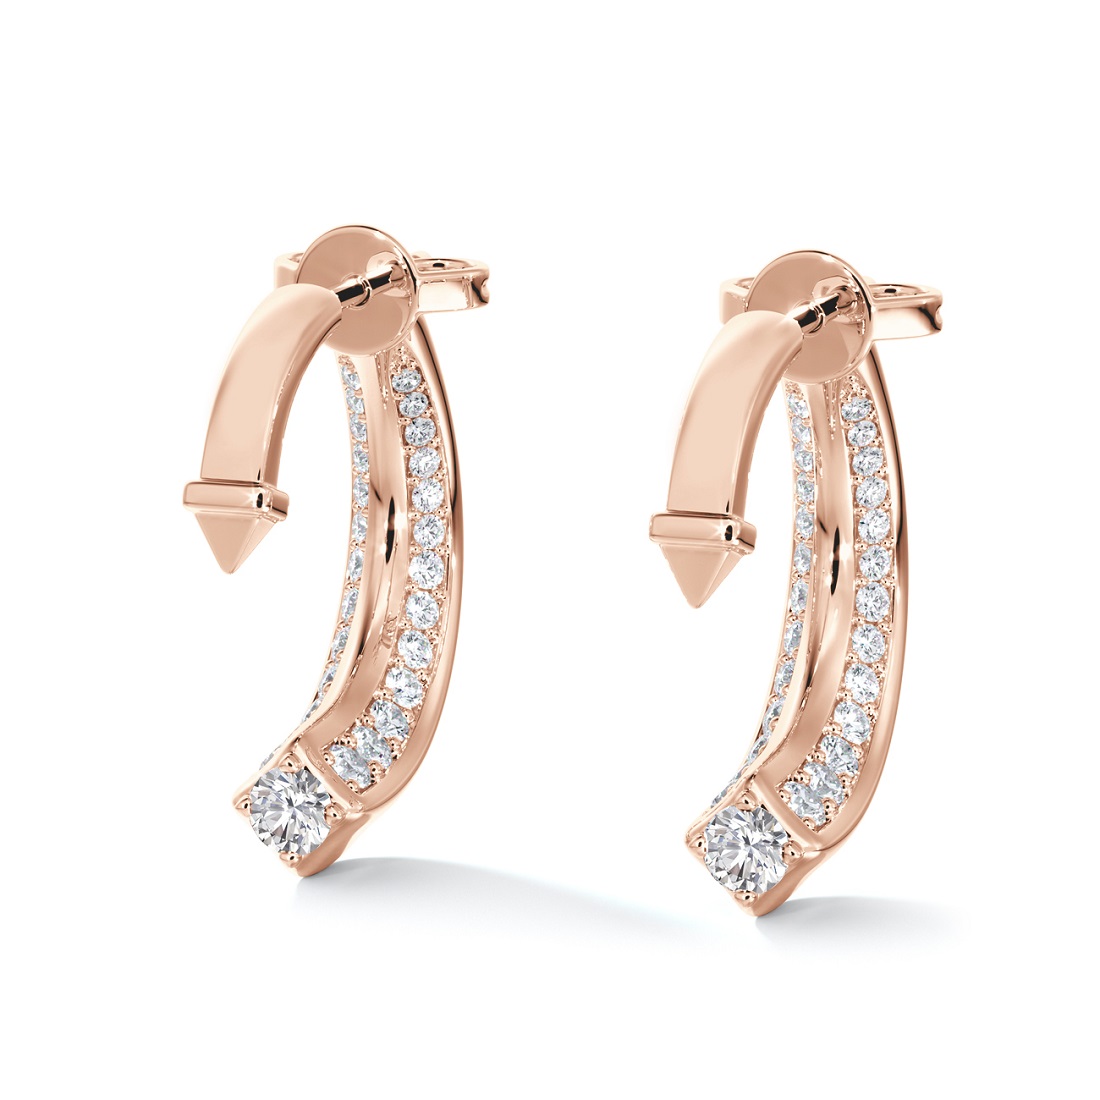 Forevermark Avaanti Collection Arc Earrings Rose Gold Pavé